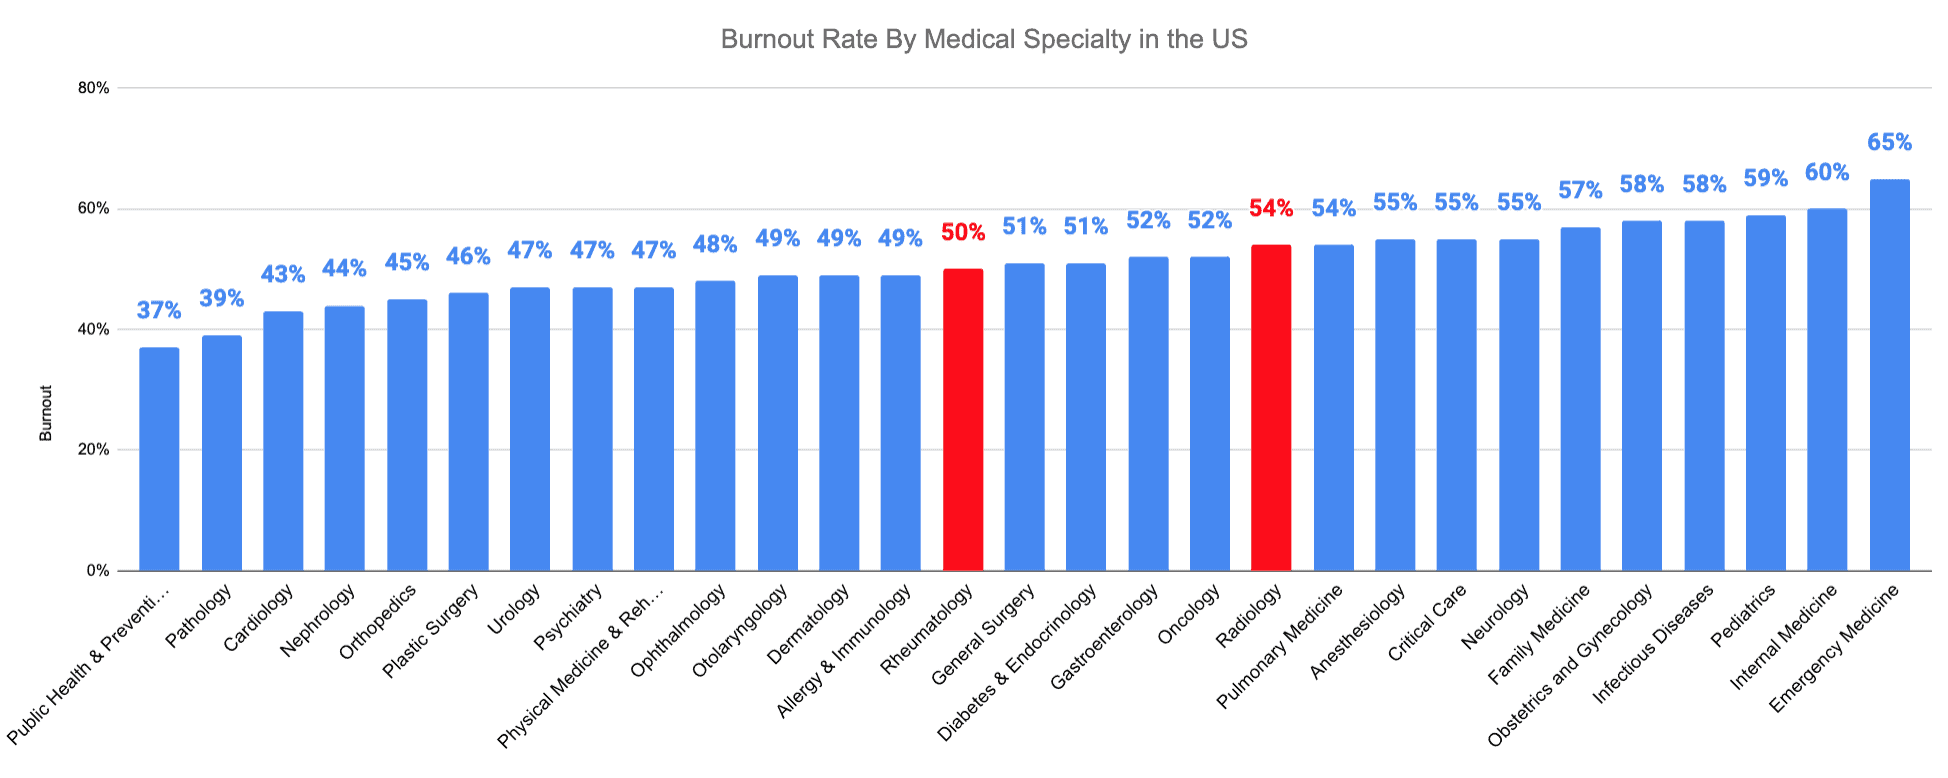 Burnout Rate By Medical Specialty in the US